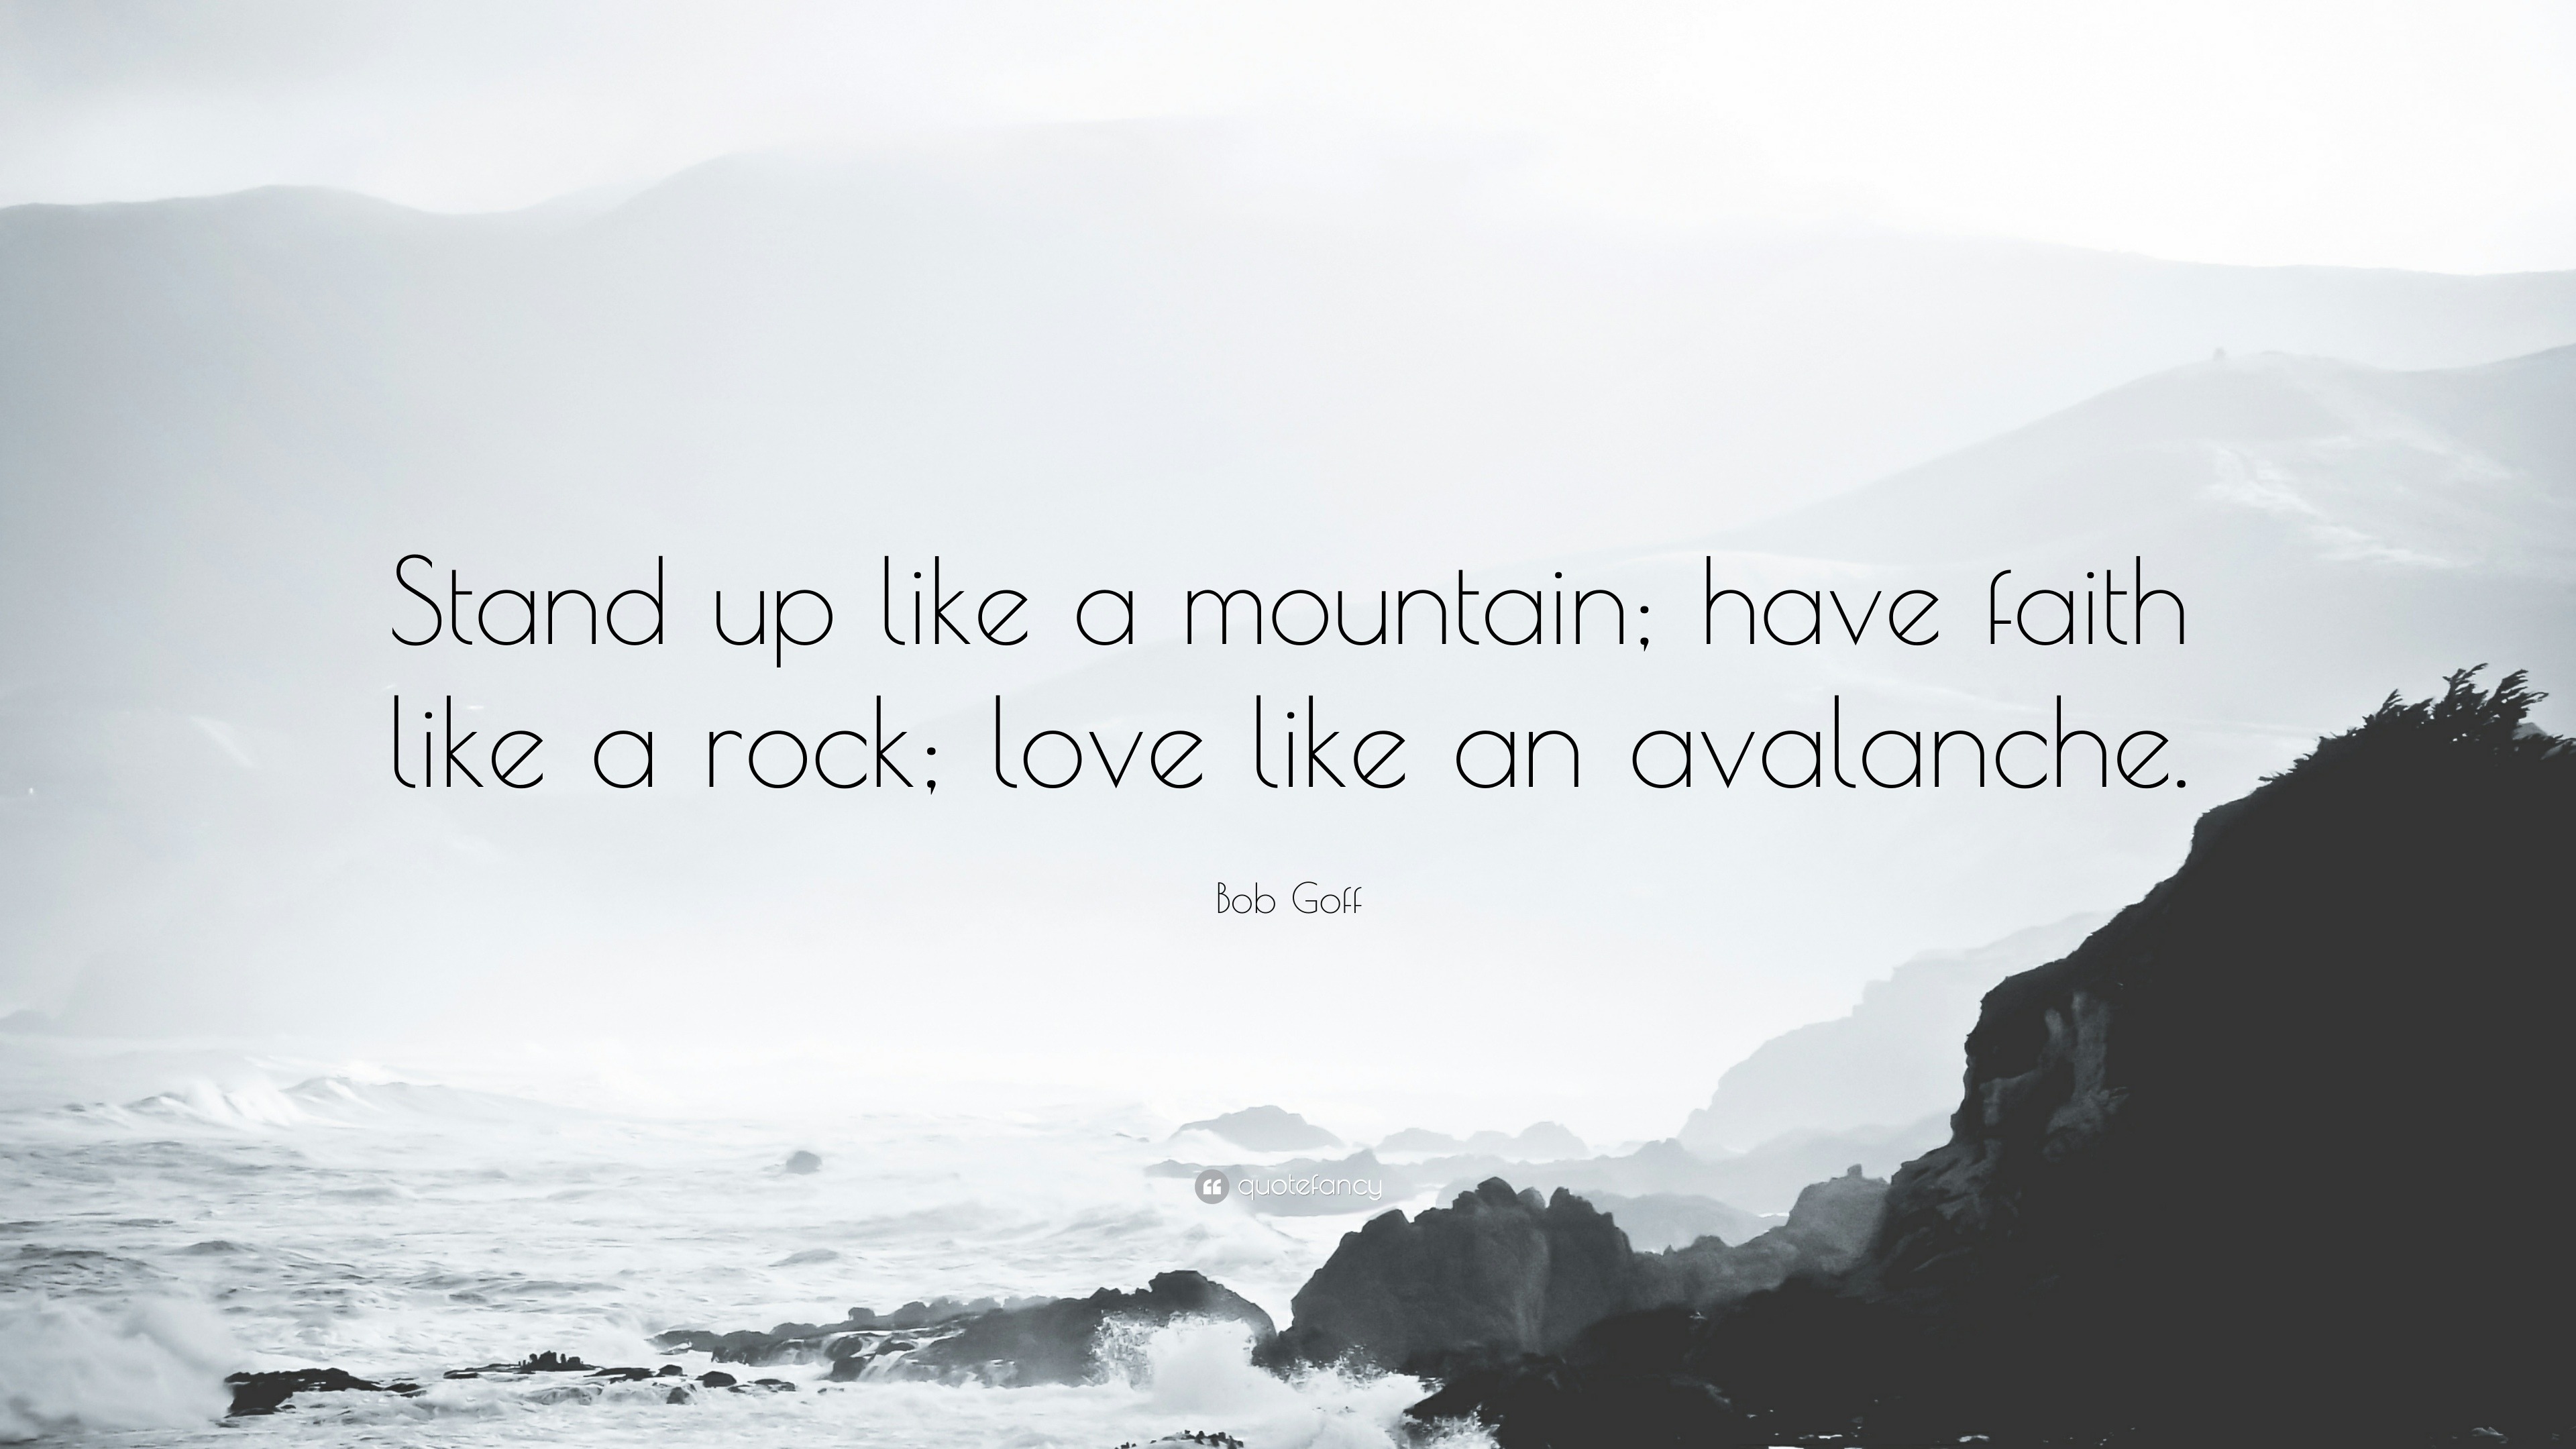 Bob Goff Quote “Stand up like a mountain have faith like a rock